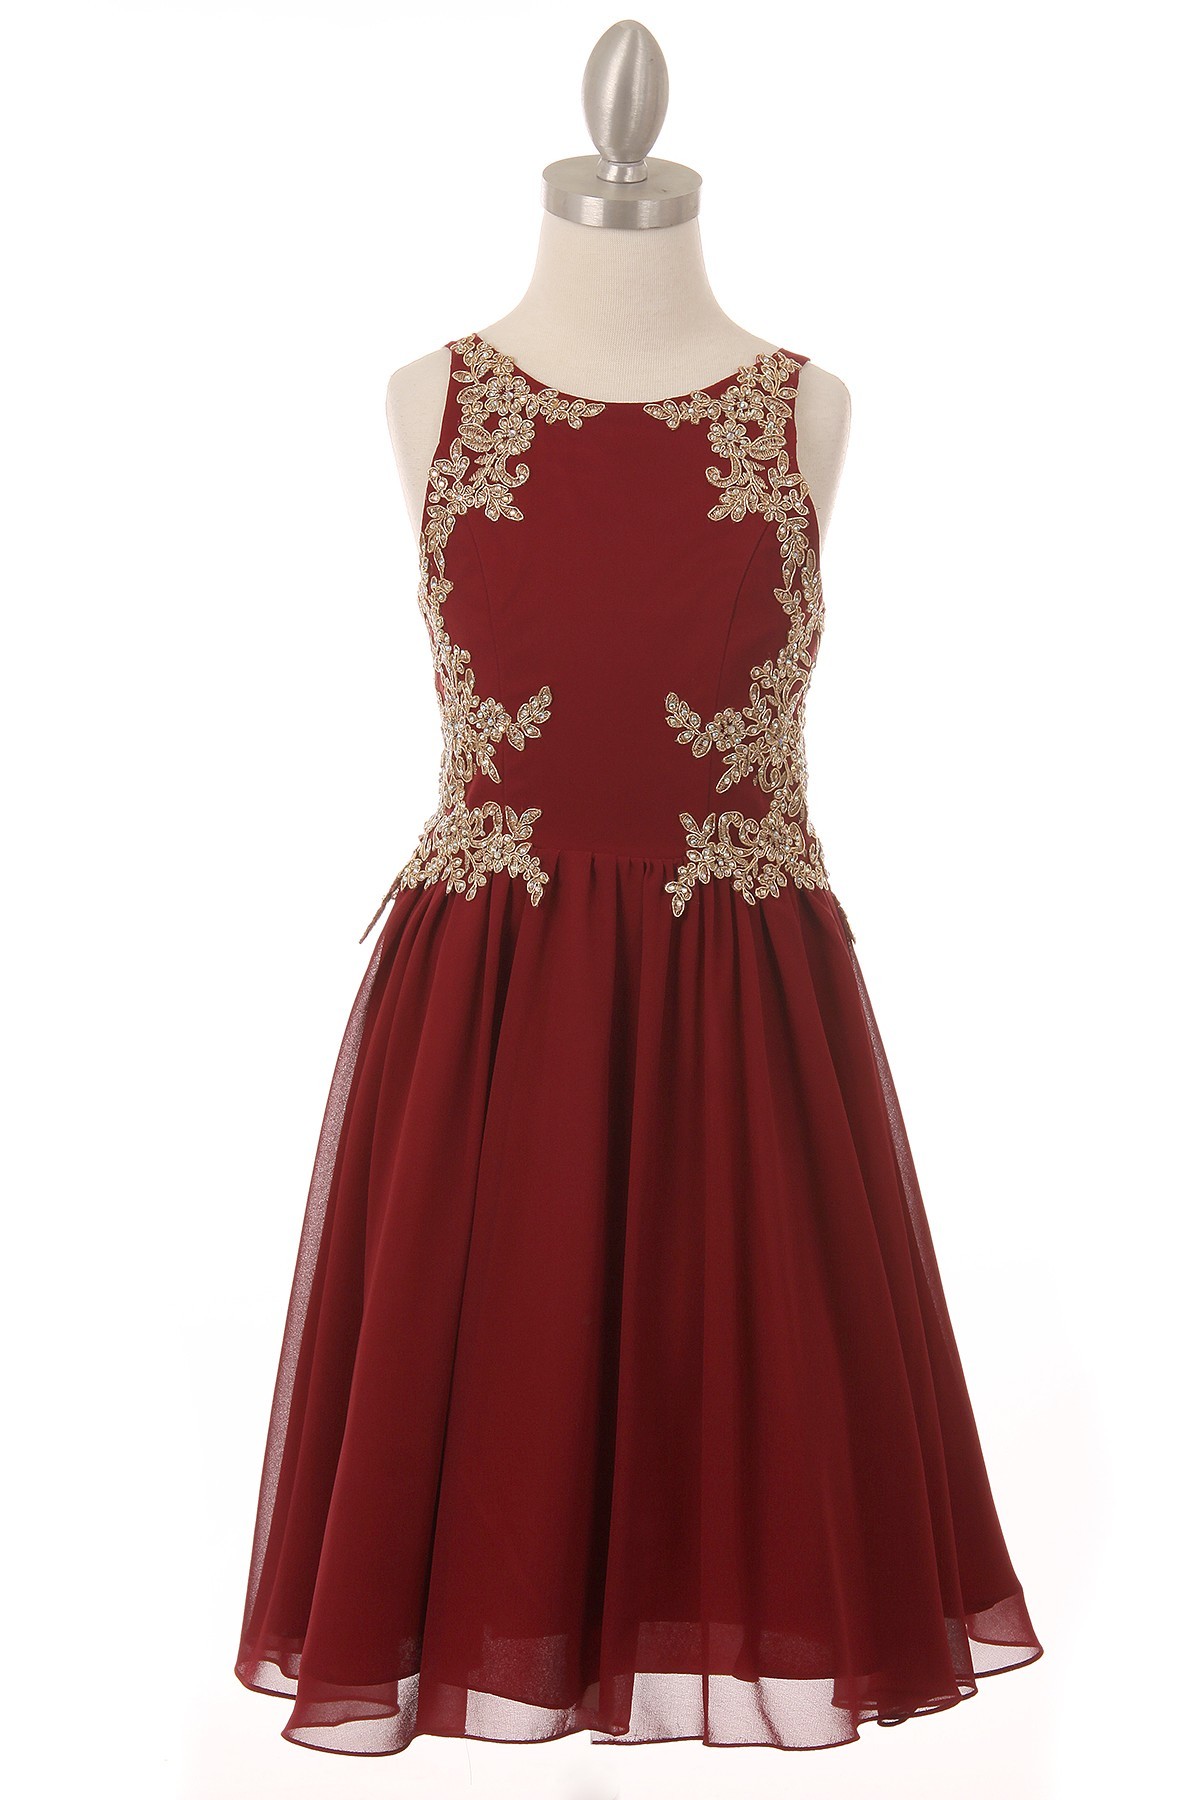 girls burgundy dress with golden lace